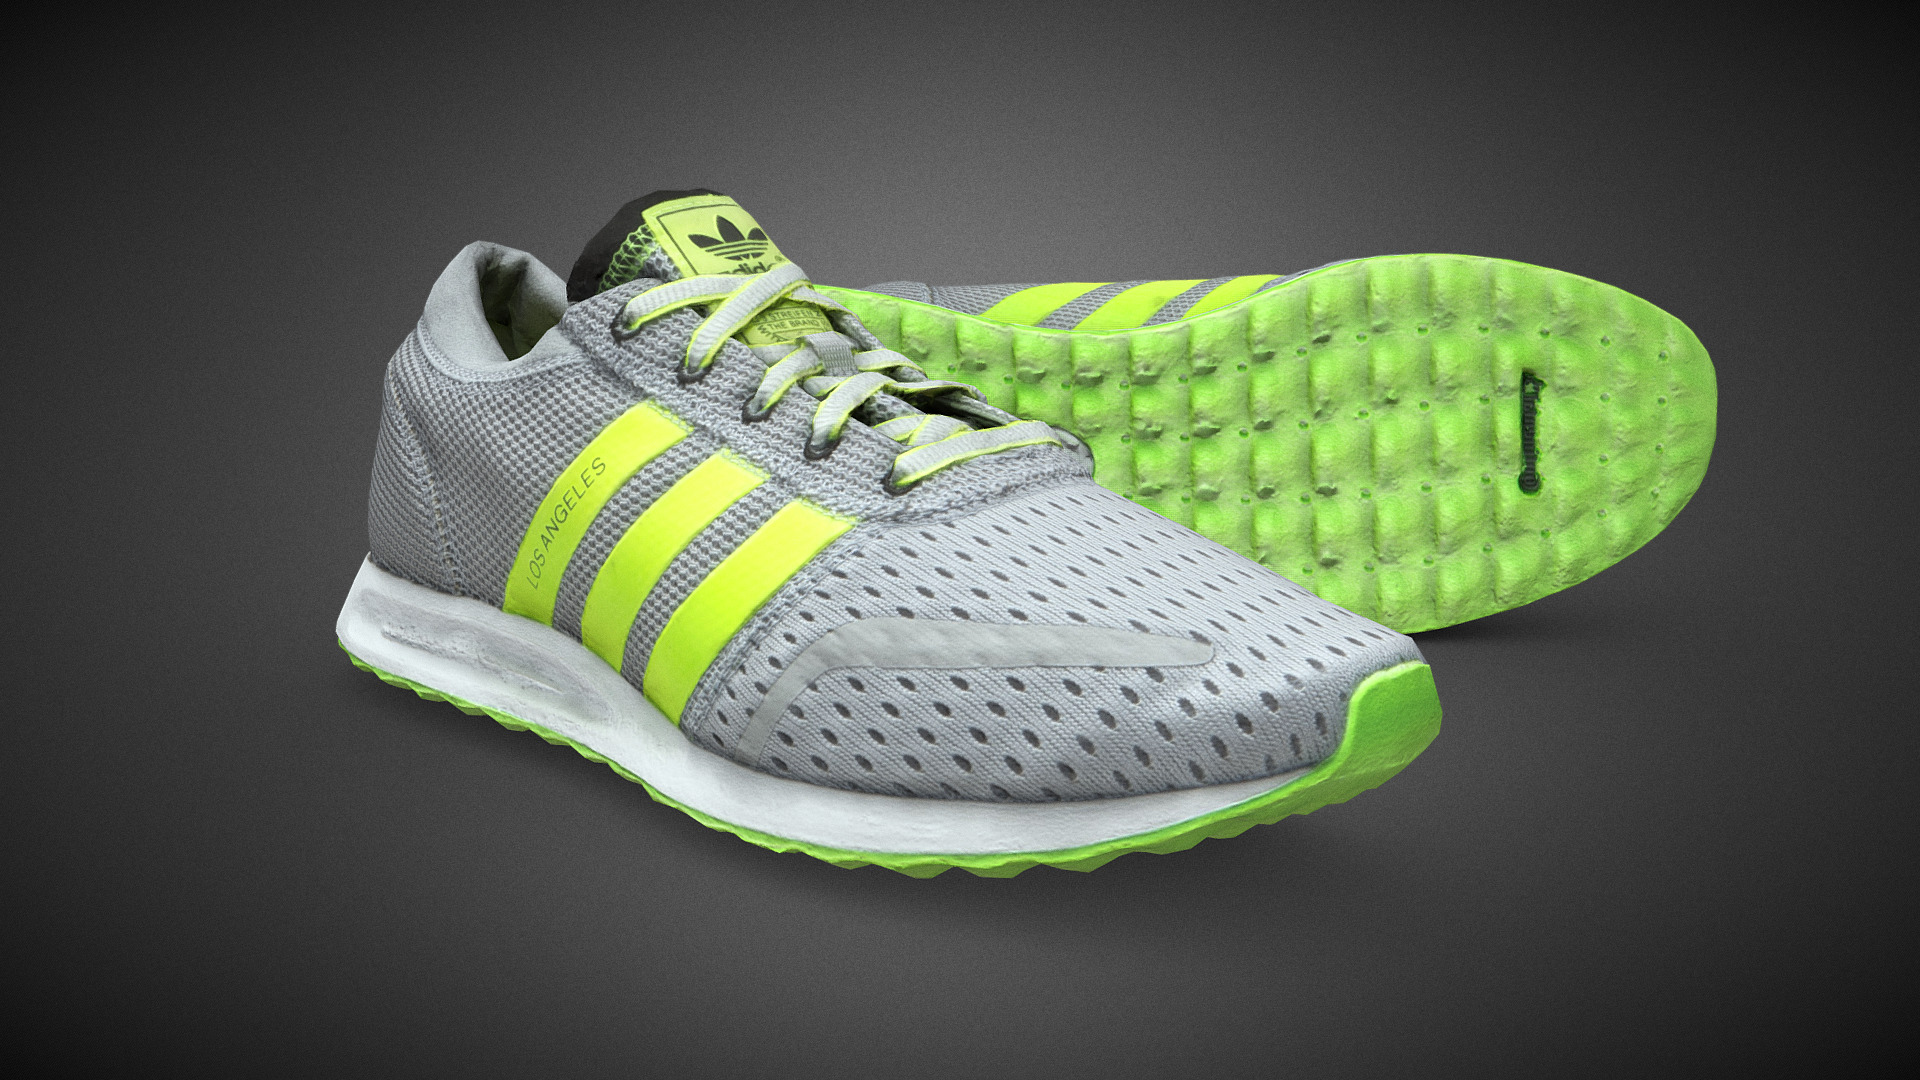 3D model Adidas Los Angeles - This is a 3D model of the Adidas Los Angeles. The 3D model is about a green and yellow tennis shoe.